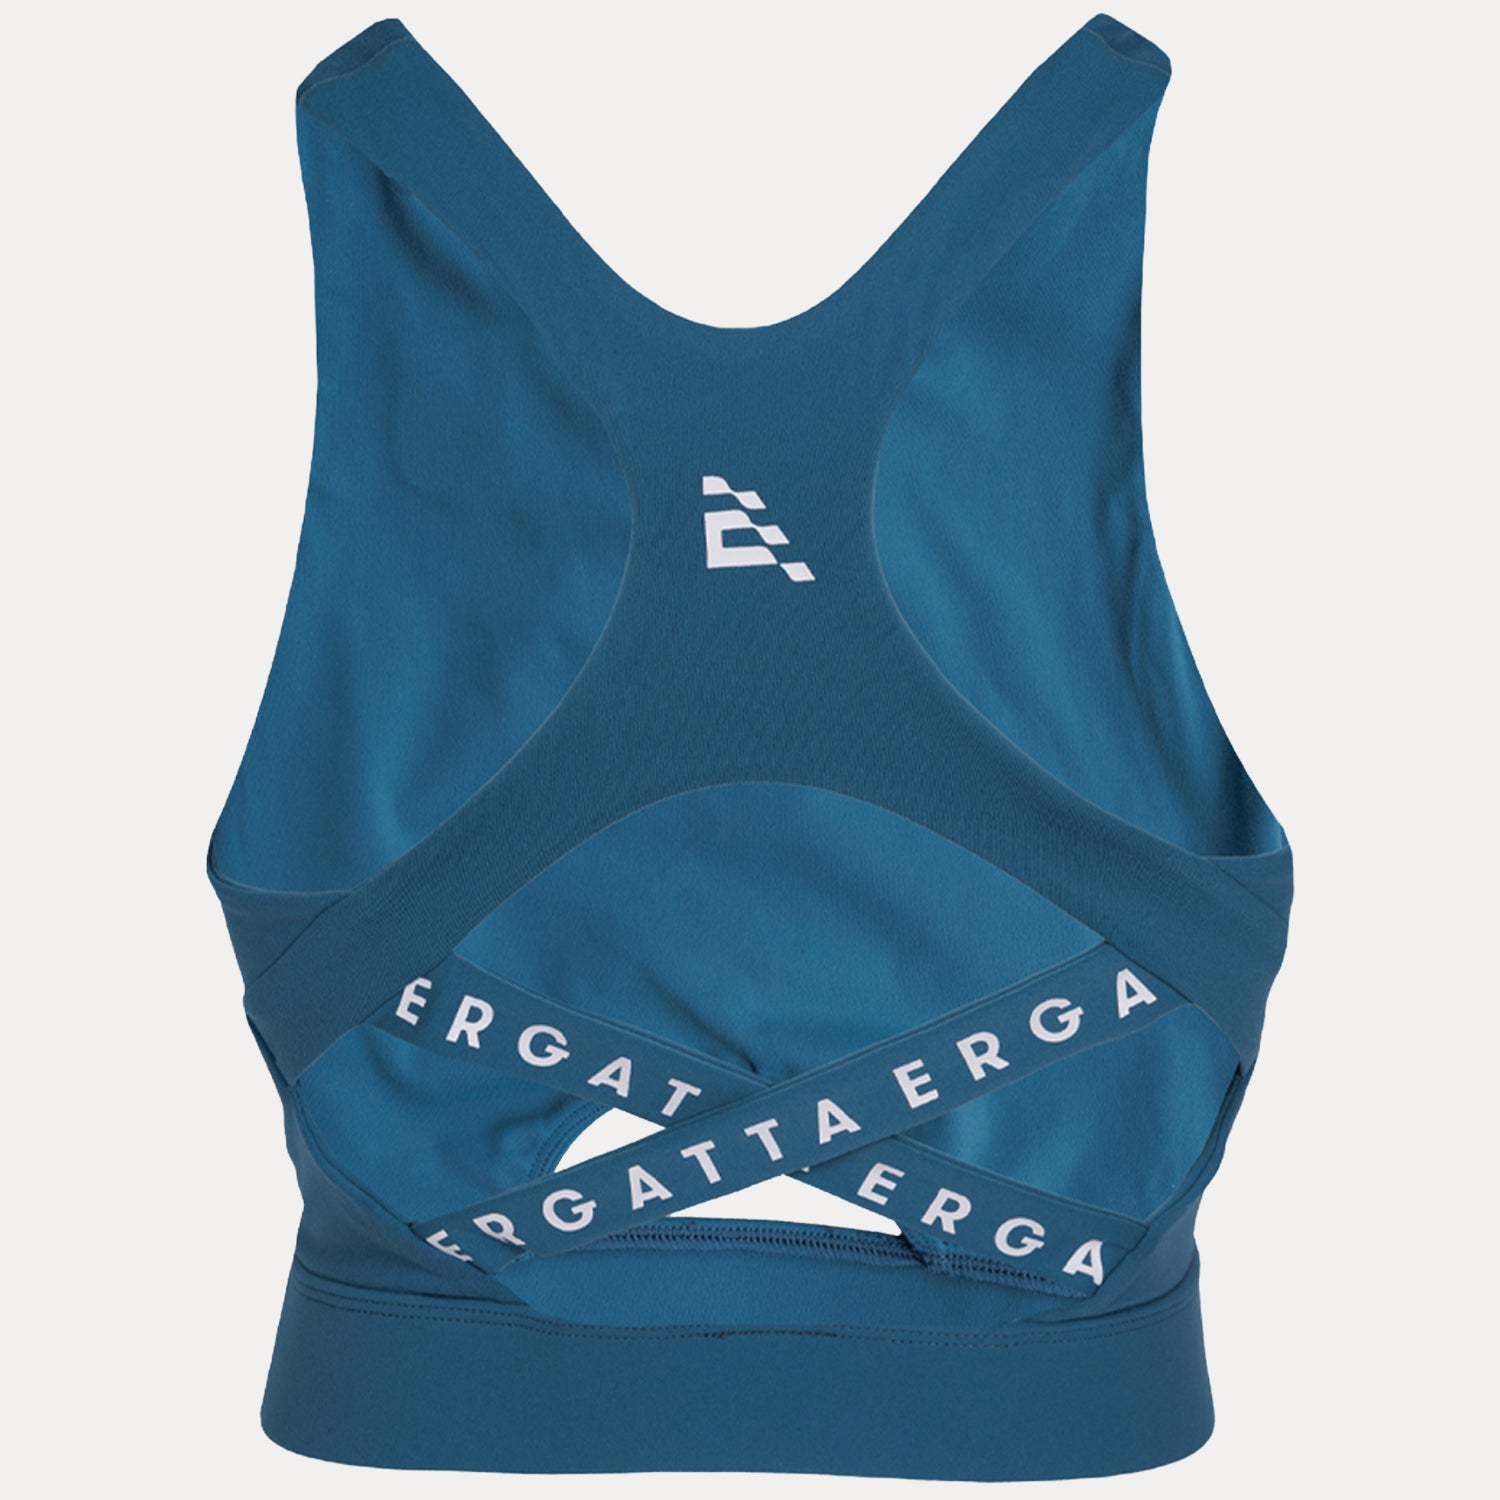 back of deep teal Women's compression tank with crossed straps with "ERGATTA" text and Ergatta flag logo on back